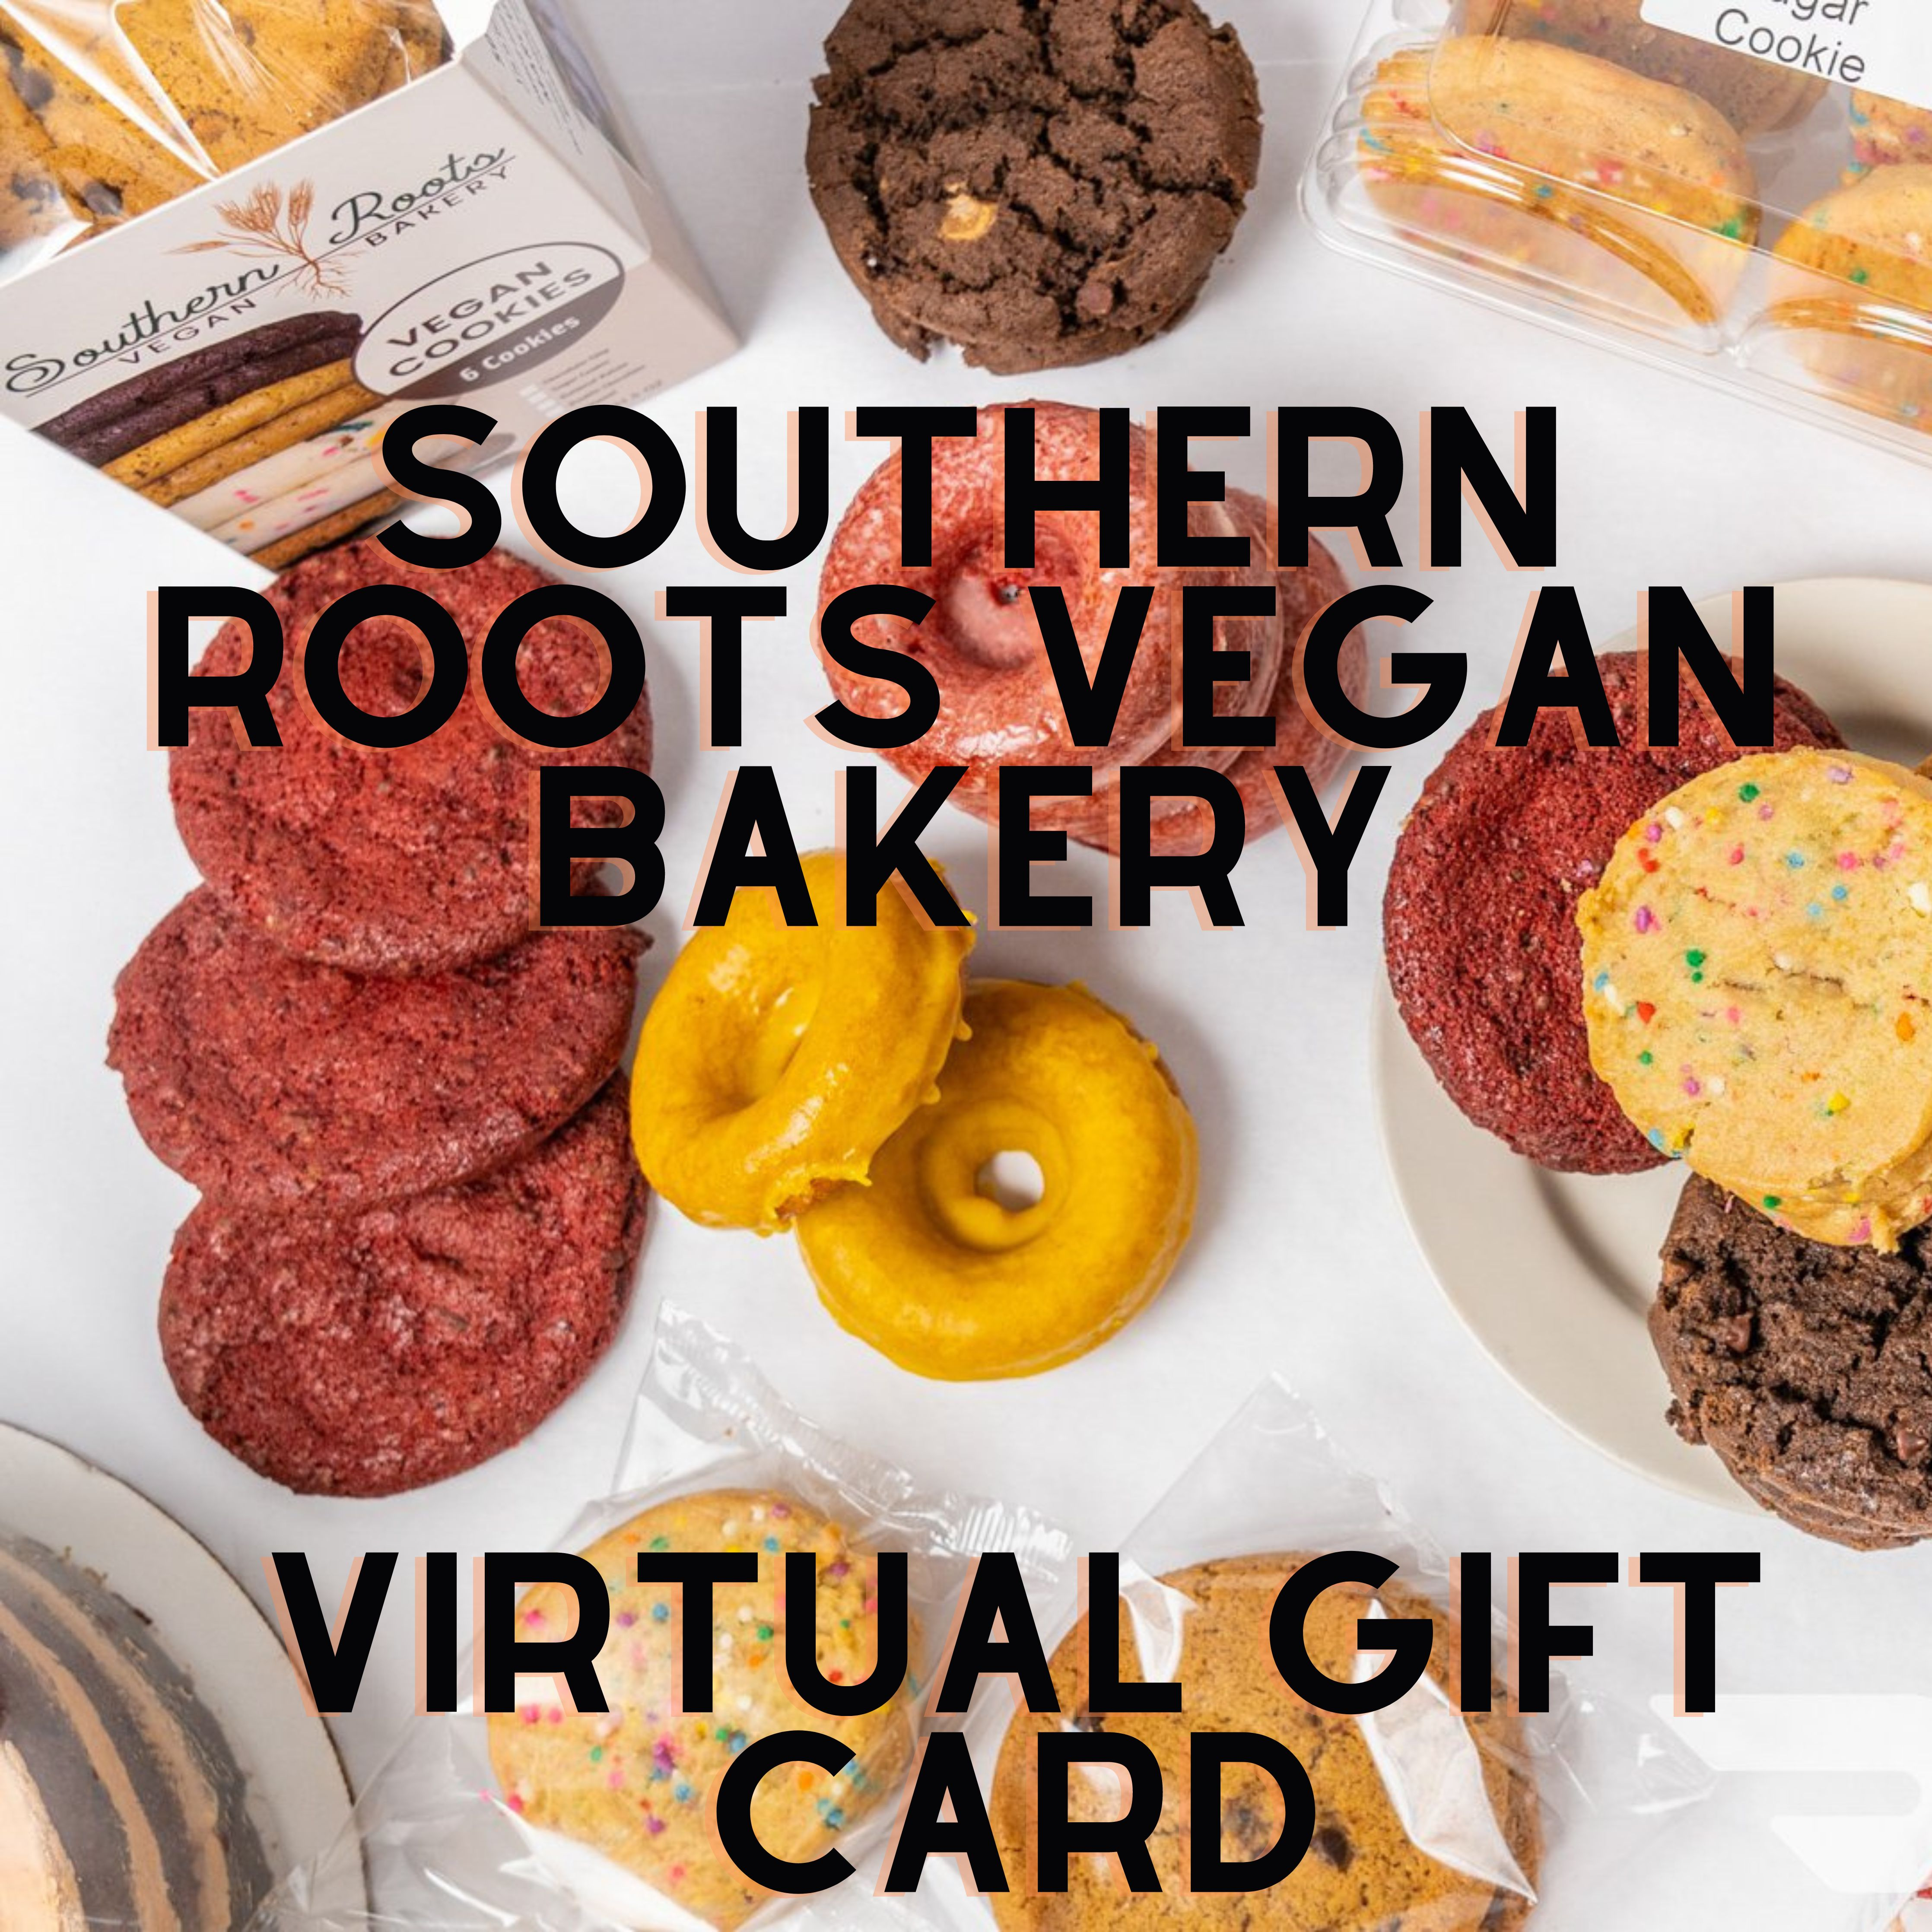 Virtual Gift Cards - Southern Roots Vegan Bakery